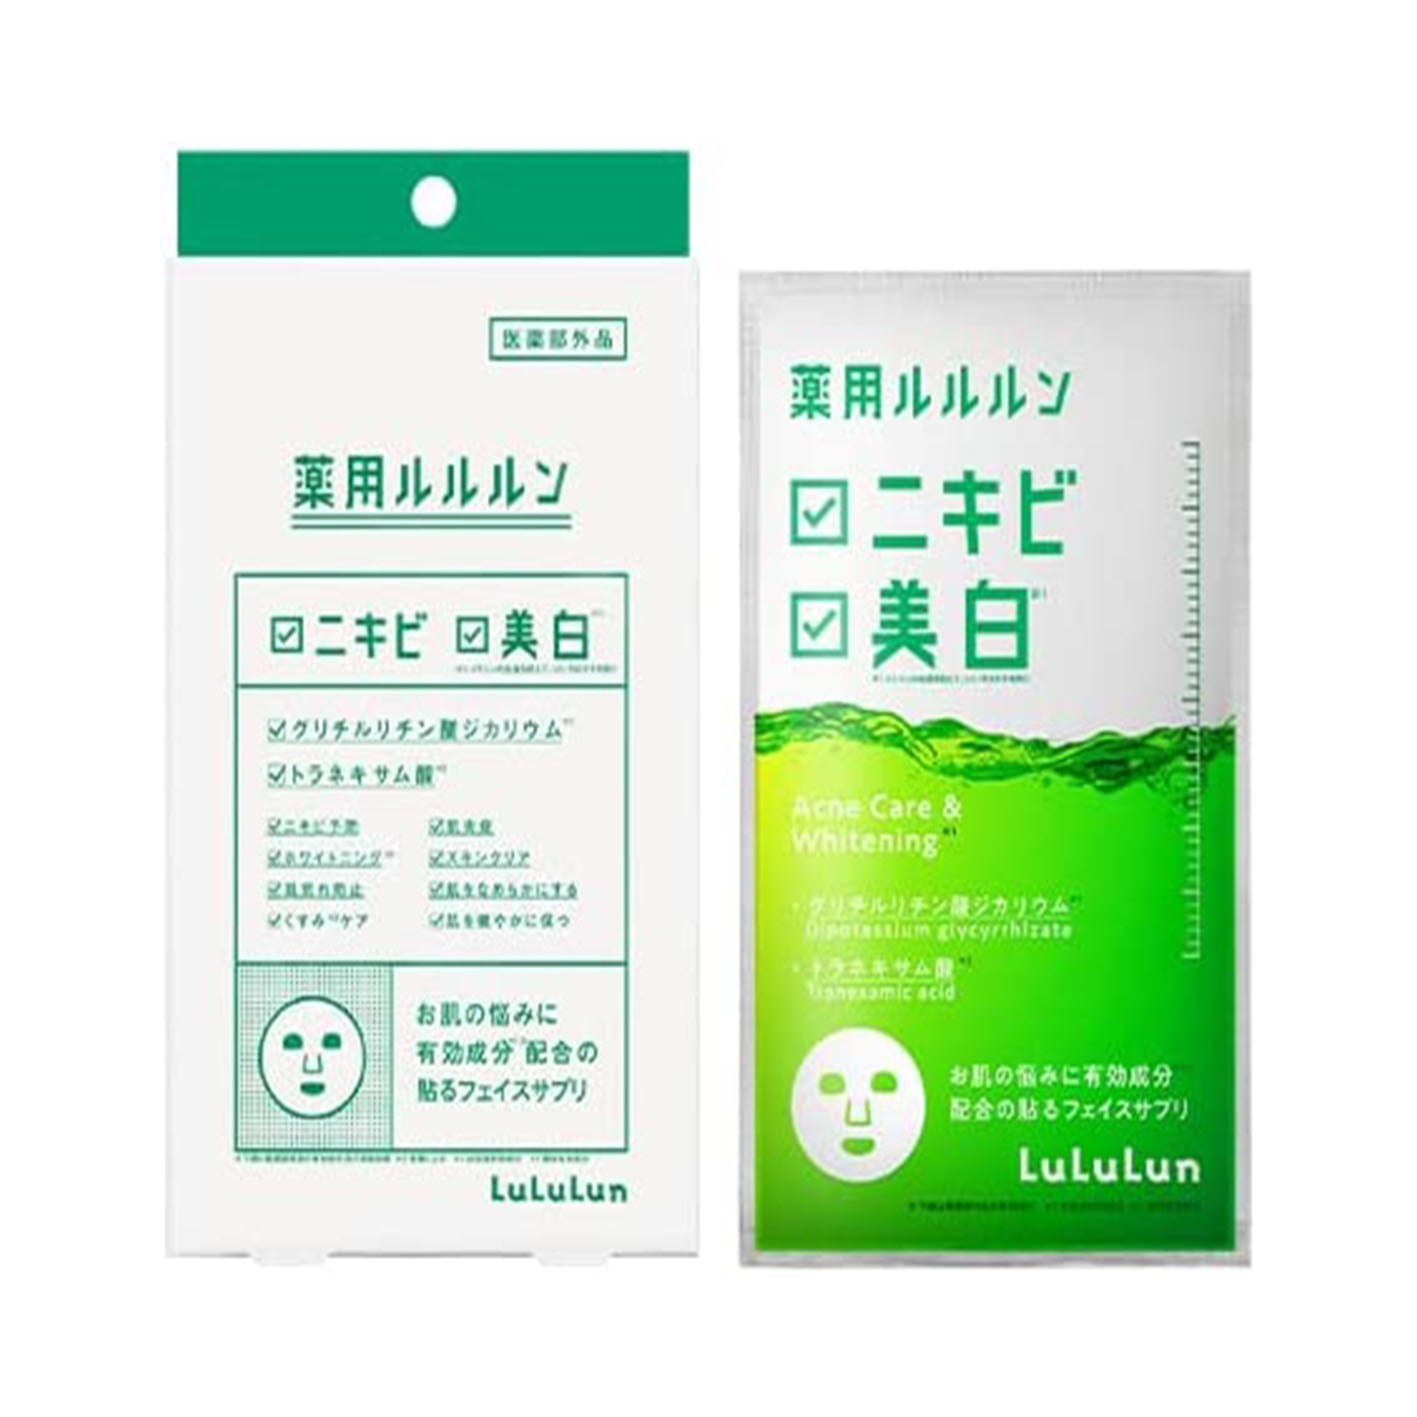 Lululun Medicated Whitening Acne Face Mask 4pcs - Harajuku Culture Japan - Japanease Products Store Beauty and Stationery